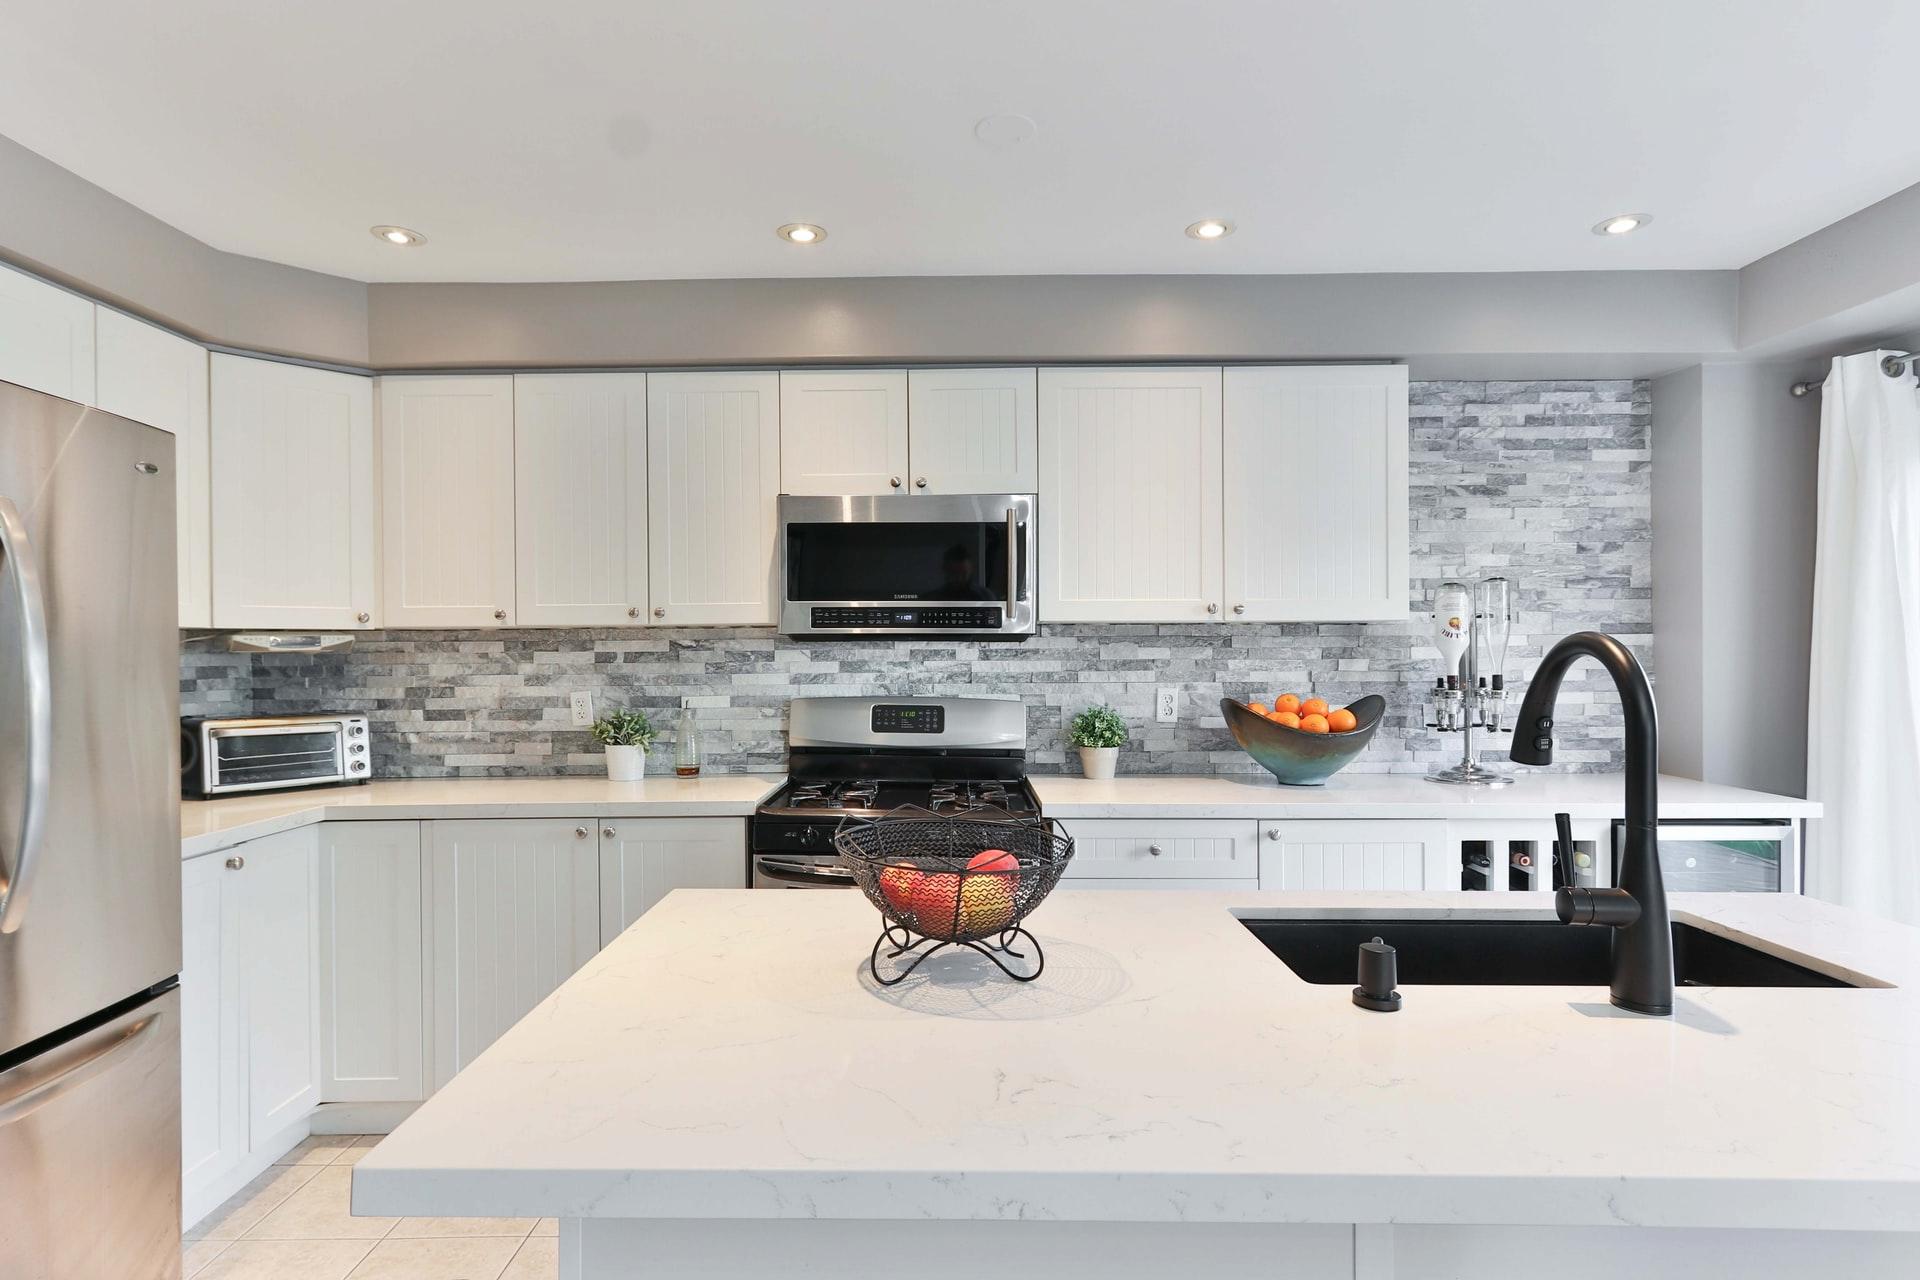 Why A Granite Worktop Is The Most Superior Choice For Your Kitchen?